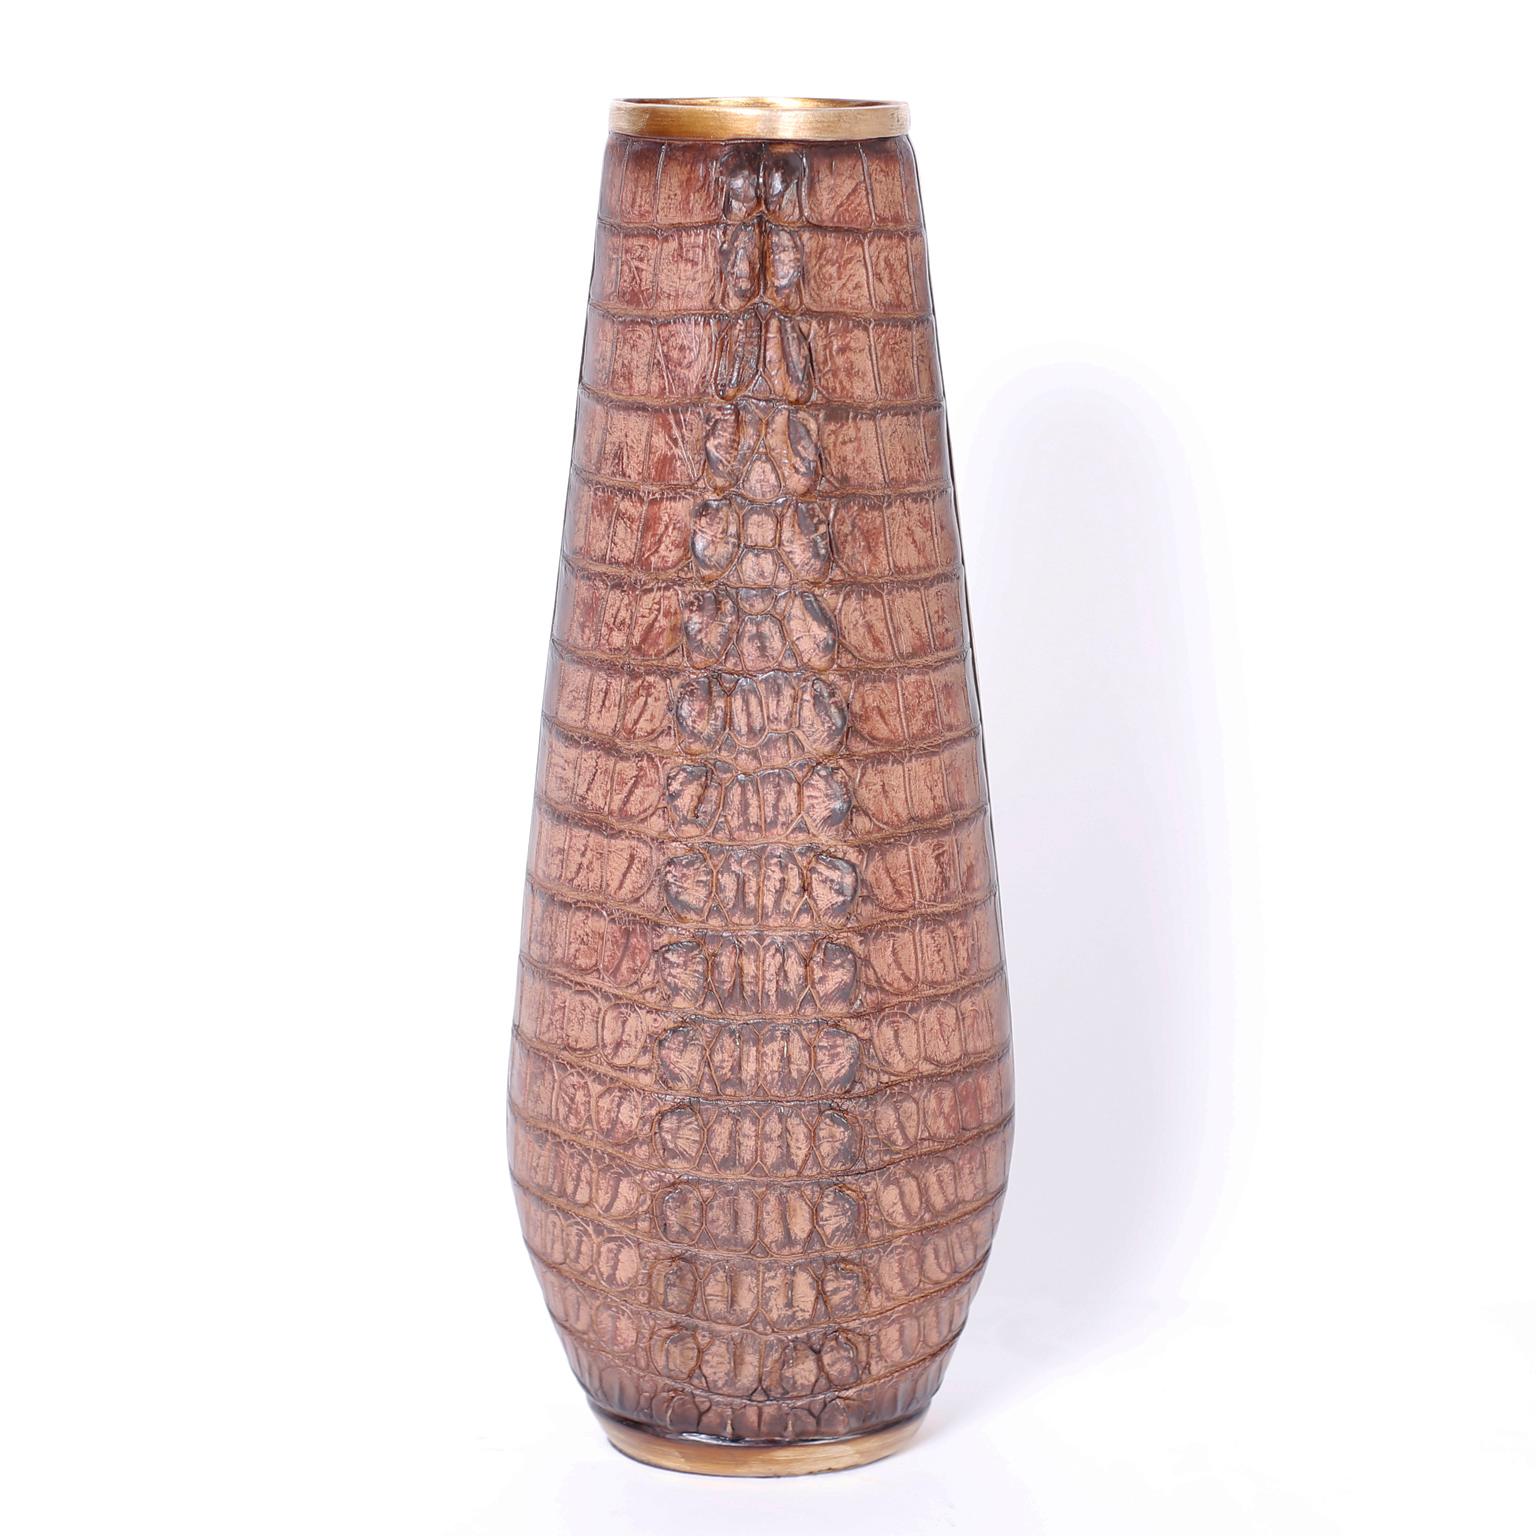 Pair of tall vases ingeniously crafted in cast composition depicting alligator hide with brass like highlights.